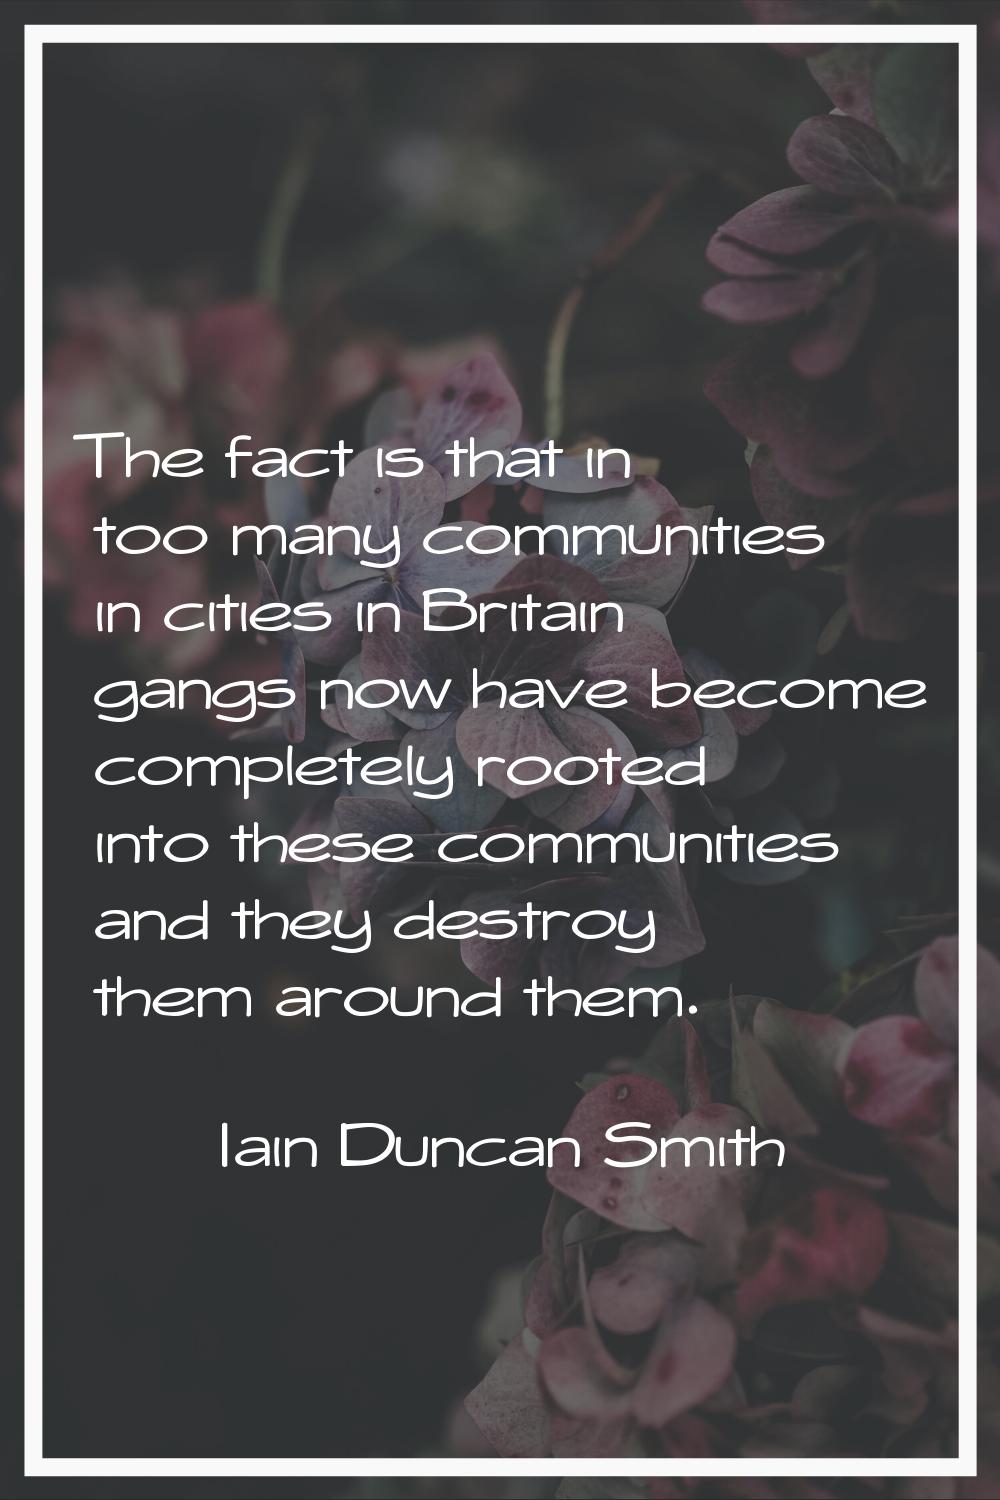 The fact is that in too many communities in cities in Britain gangs now have become completely root